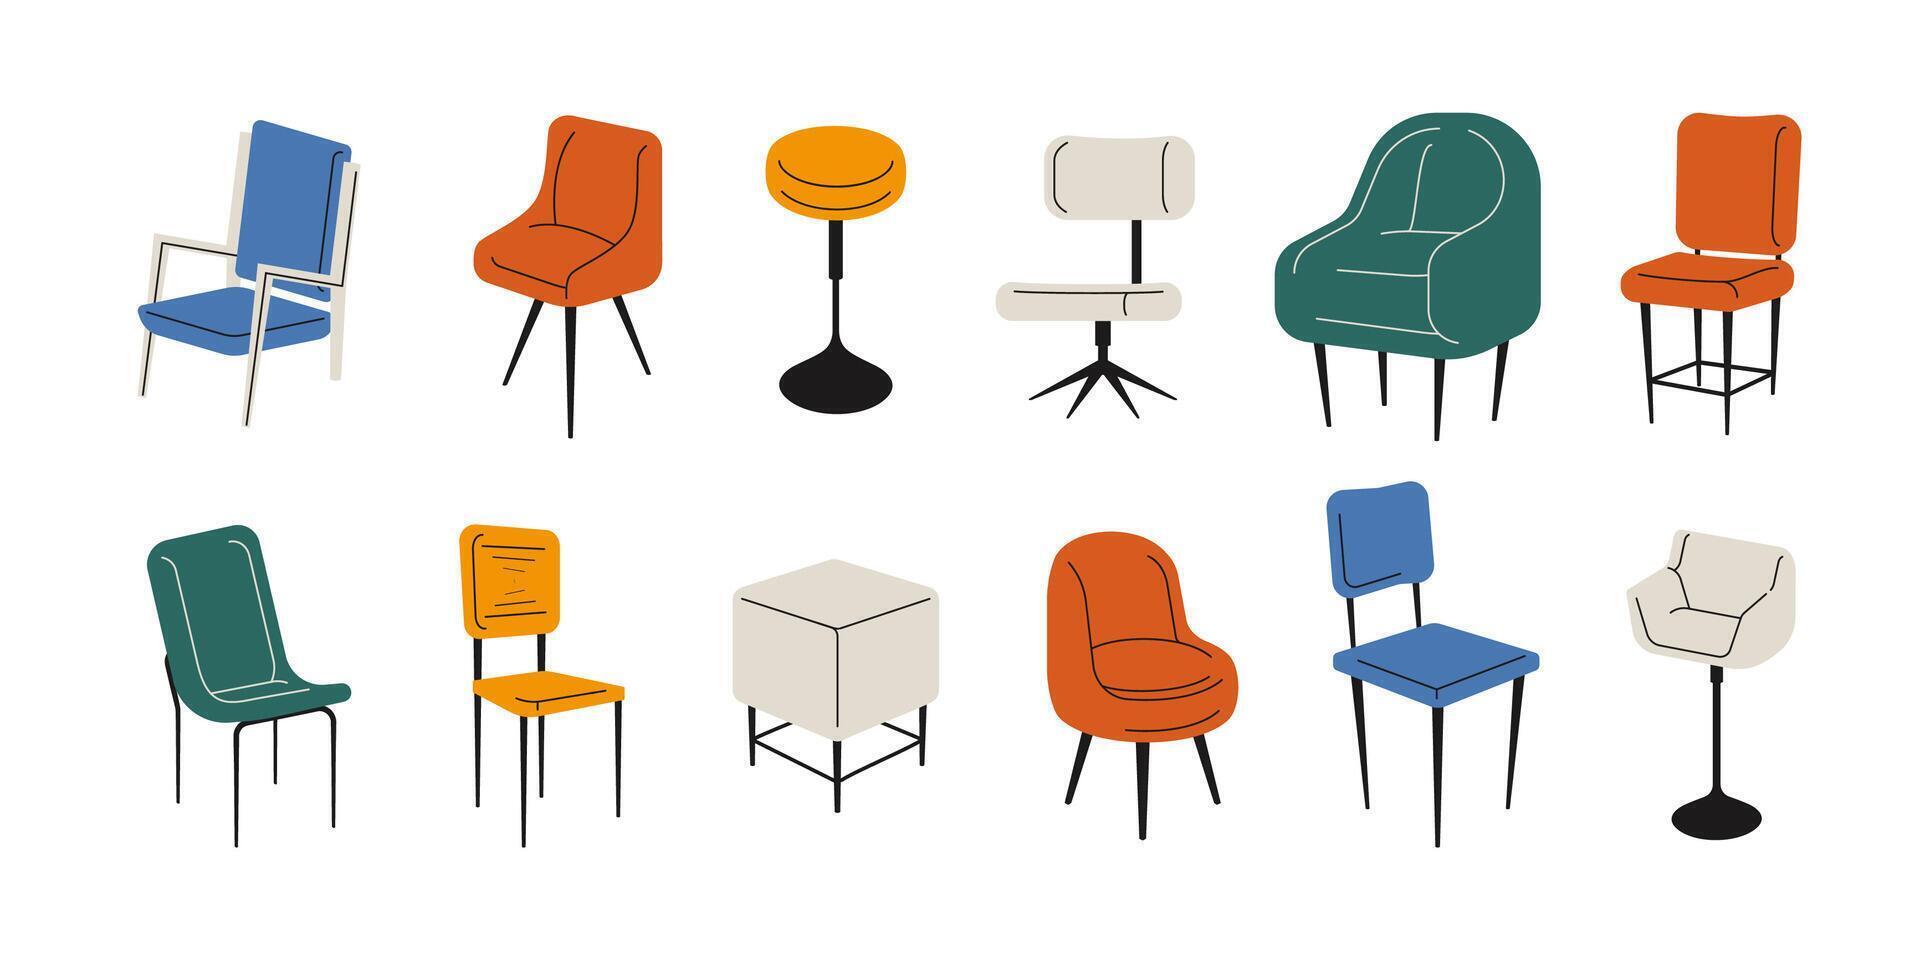 Chairs collection. Modern room interior furniture, cartoon stools different types and shapes, cozy home decor flat style. Vector isolated set